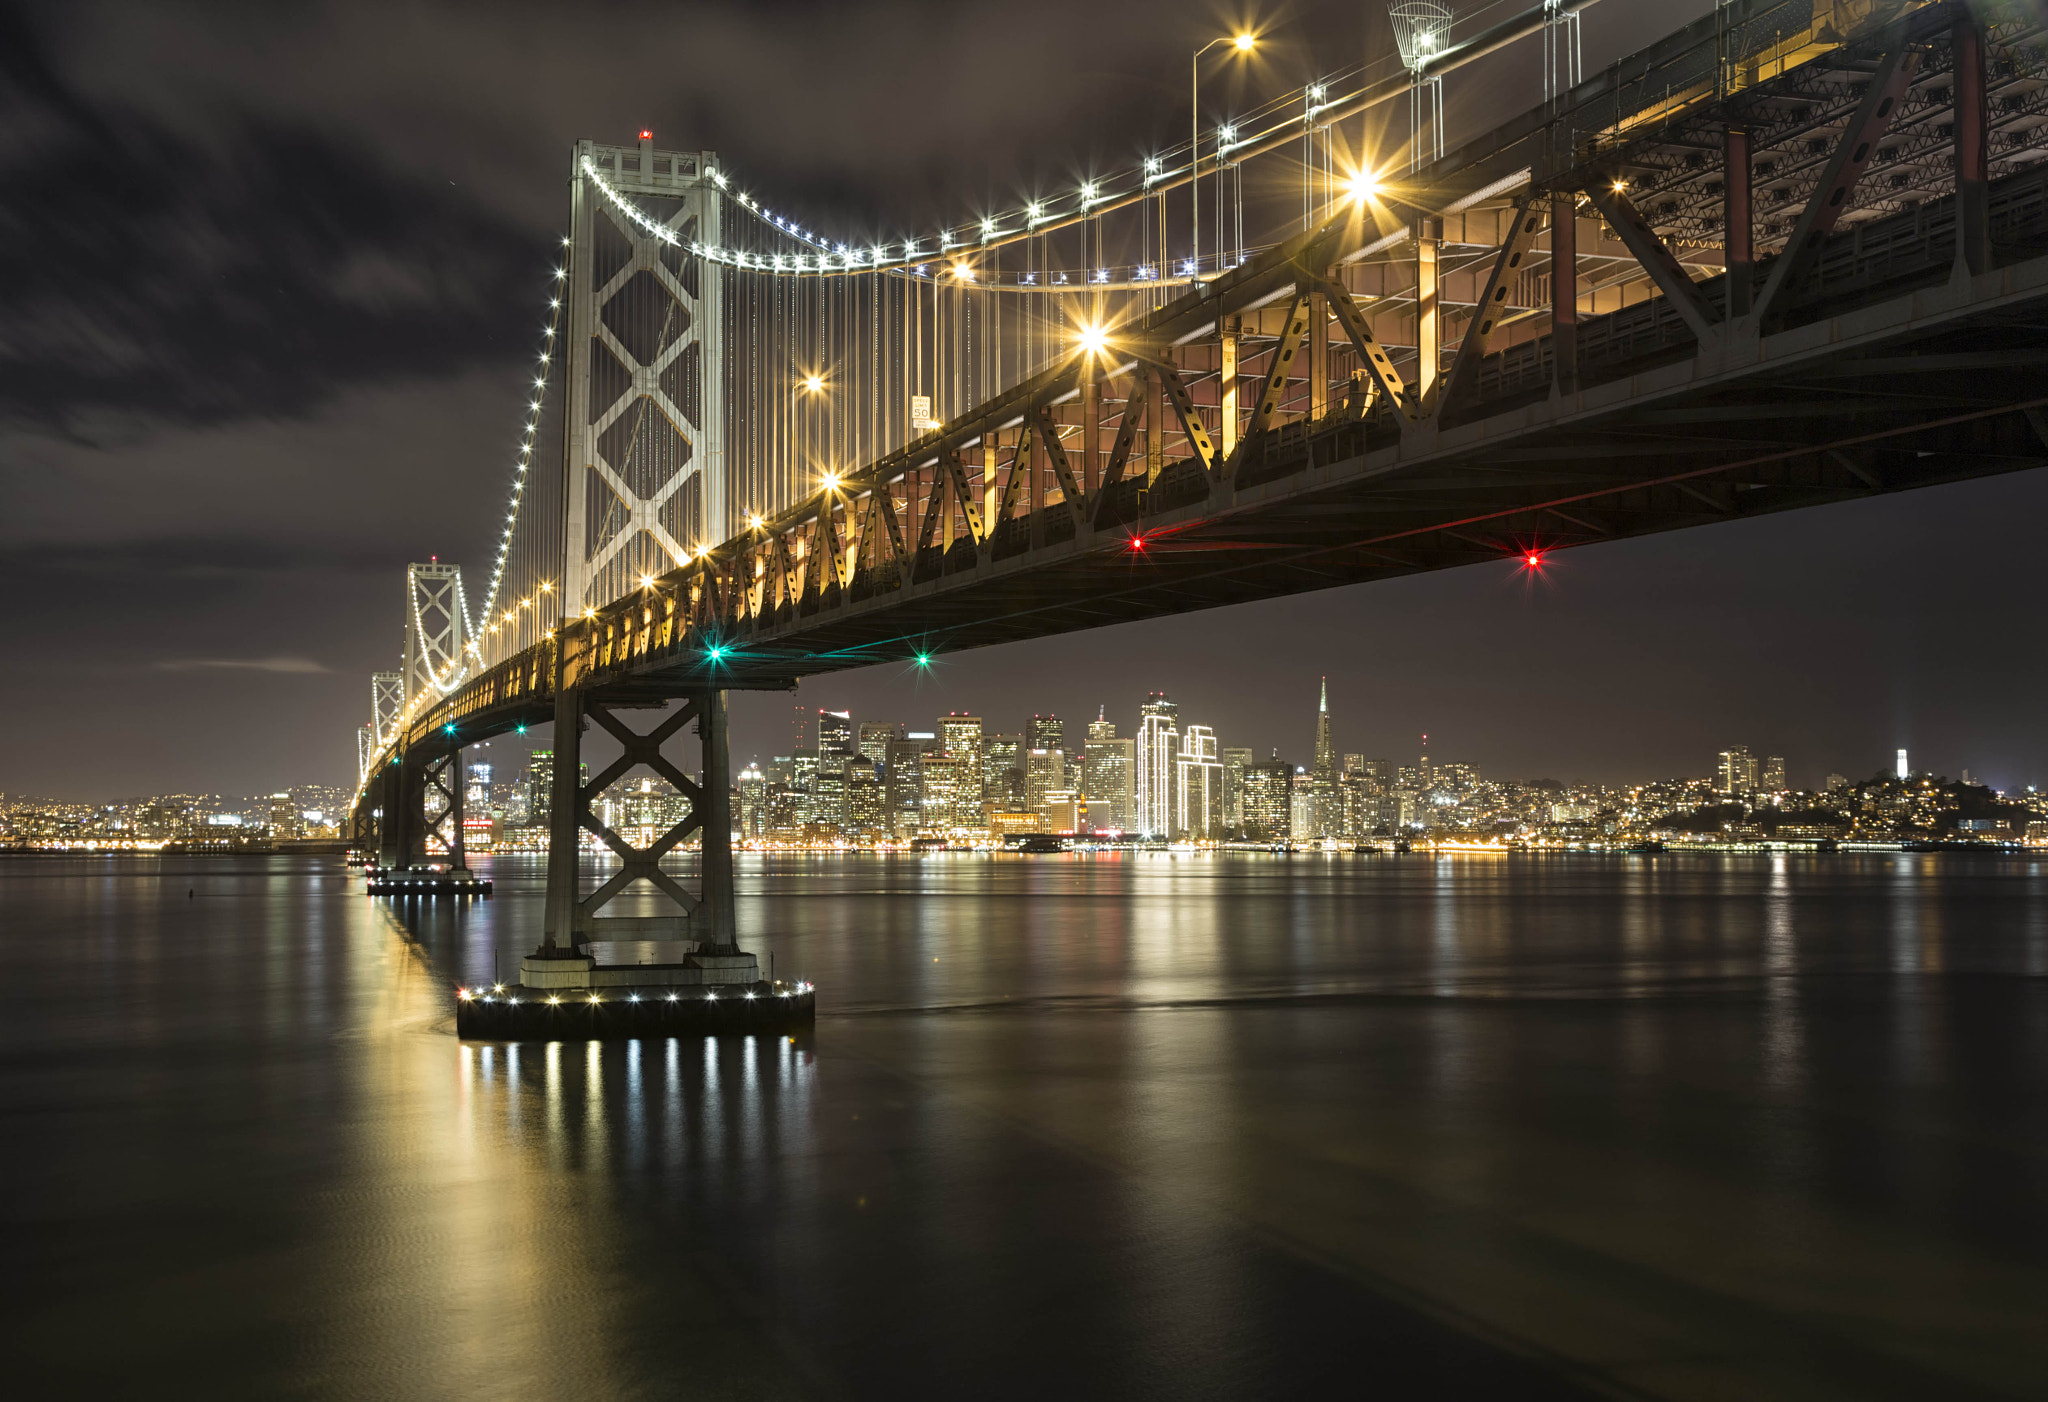 City Of San Francisco Bay Bridge Night Lights California United States Hd  Wallpapers For Tablets Free Download 3840x2400 : 